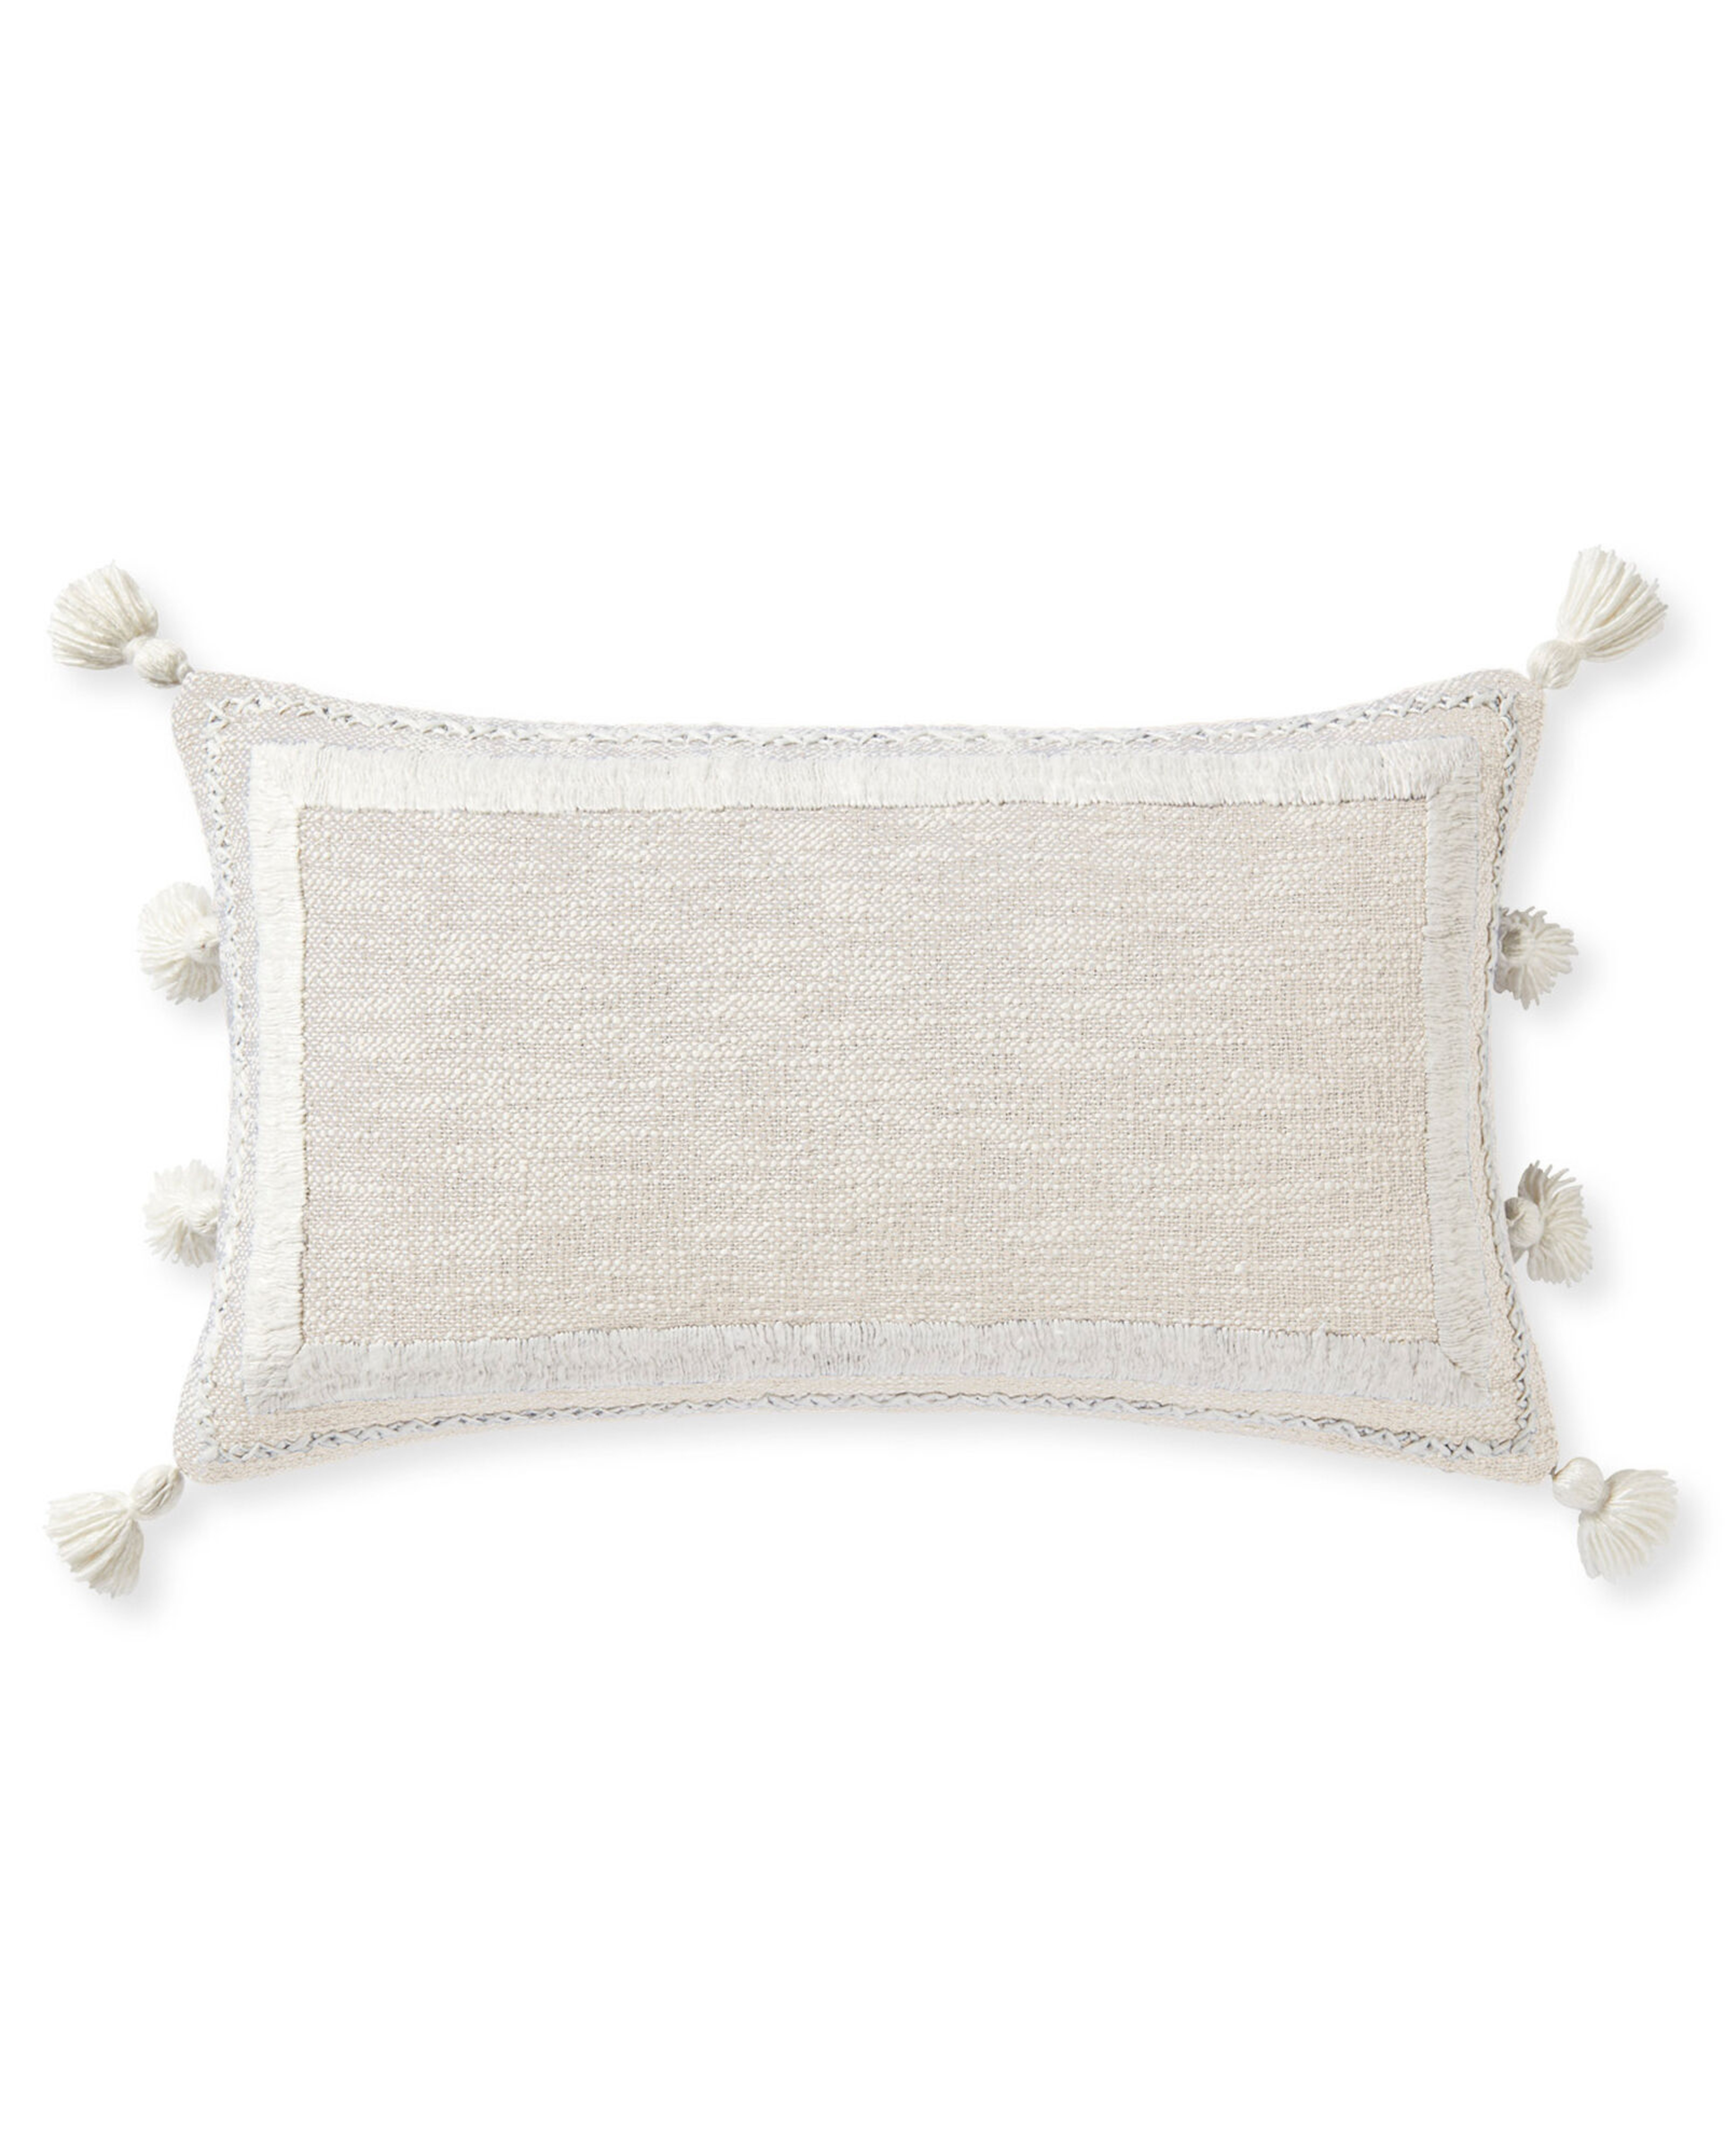 Tahoma Pillow Cover - Serena and Lily